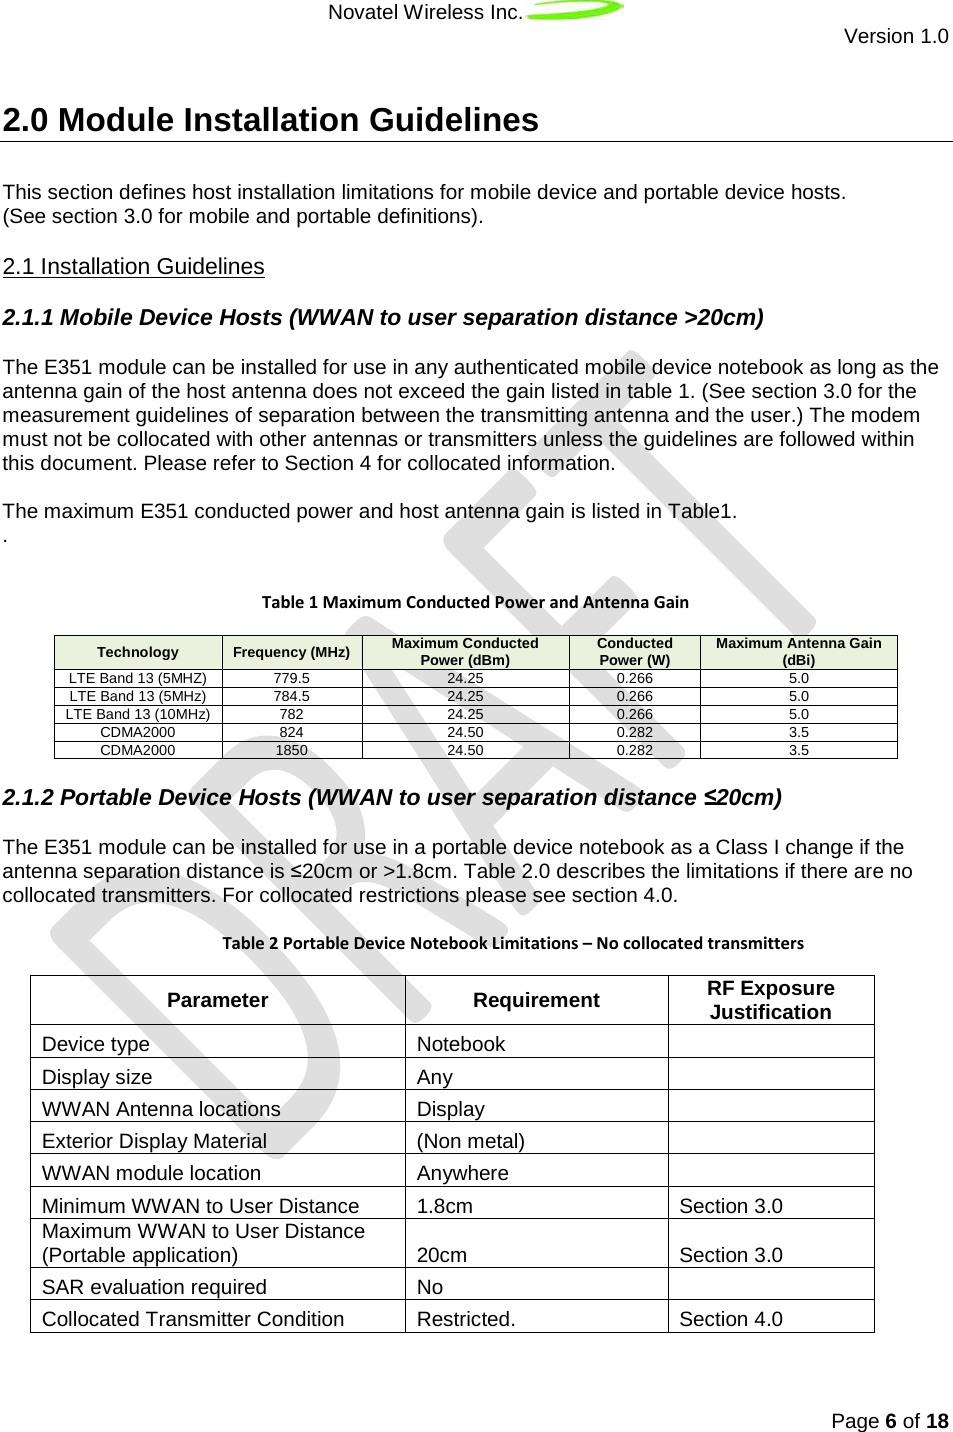 Novatel Wireless Inc.  Version 1.0   Page 6 of 18  2.0 Module Installation Guidelines This section defines host installation limitations for mobile device and portable device hosts.  (See section 3.0 for mobile and portable definitions). 2.1.1 Mobile Device Hosts (WWAN to user separation distance &gt;20cm) 2.1 Installation Guidelines The E351 module can be installed for use in any authenticated mobile device notebook as long as the antenna gain of the host antenna does not exceed the gain listed in table 1. (See section 3.0 for the measurement guidelines of separation between the transmitting antenna and the user.) The modem must not be collocated with other antennas or transmitters unless the guidelines are followed within this document. Please refer to Section 4 for collocated information.  The maximum E351 conducted power and host antenna gain is listed in Table1. .   Table 1 Maximum Conducted Power and Antenna Gain Technology Frequency (MHz) Maximum Conducted Power (dBm) Conducted Power (W) Maximum Antenna Gain (dBi) LTE Band 13 (5MHZ) 779.5 24.25 0.266 5.0 LTE Band 13 (5MHz) 784.5 24.25 0.266 5.0 LTE Band 13 (10MHz) 782 24.25 0.266 5.0 CDMA2000 824 24.50 0.282 3.5 CDMA2000 1850 24.50 0.282 3.5 2.1.2 Portable Device Hosts (WWAN to user separation distance ≤20cm) The E351 module can be installed for use in a portable device notebook as a Class I change if the antenna separation distance is ≤20cm or &gt;1.8cm. Table 2.0 describes the limitations if there are no collocated transmitters. For collocated restrictions please see section 4.0.    Table 2 Portable Device Notebook Limitations – No collocated transmitters Parameter Requirement RF Exposure Justification Device type Notebook  Display size Any  WWAN Antenna locations Display  Exterior Display Material (Non metal)   WWAN module location Anywhere  Minimum WWAN to User Distance 1.8cm Section 3.0 Maximum WWAN to User Distance (Portable application) 20cm Section 3.0 SAR evaluation required No  Collocated Transmitter Condition Restricted. Section 4.0   